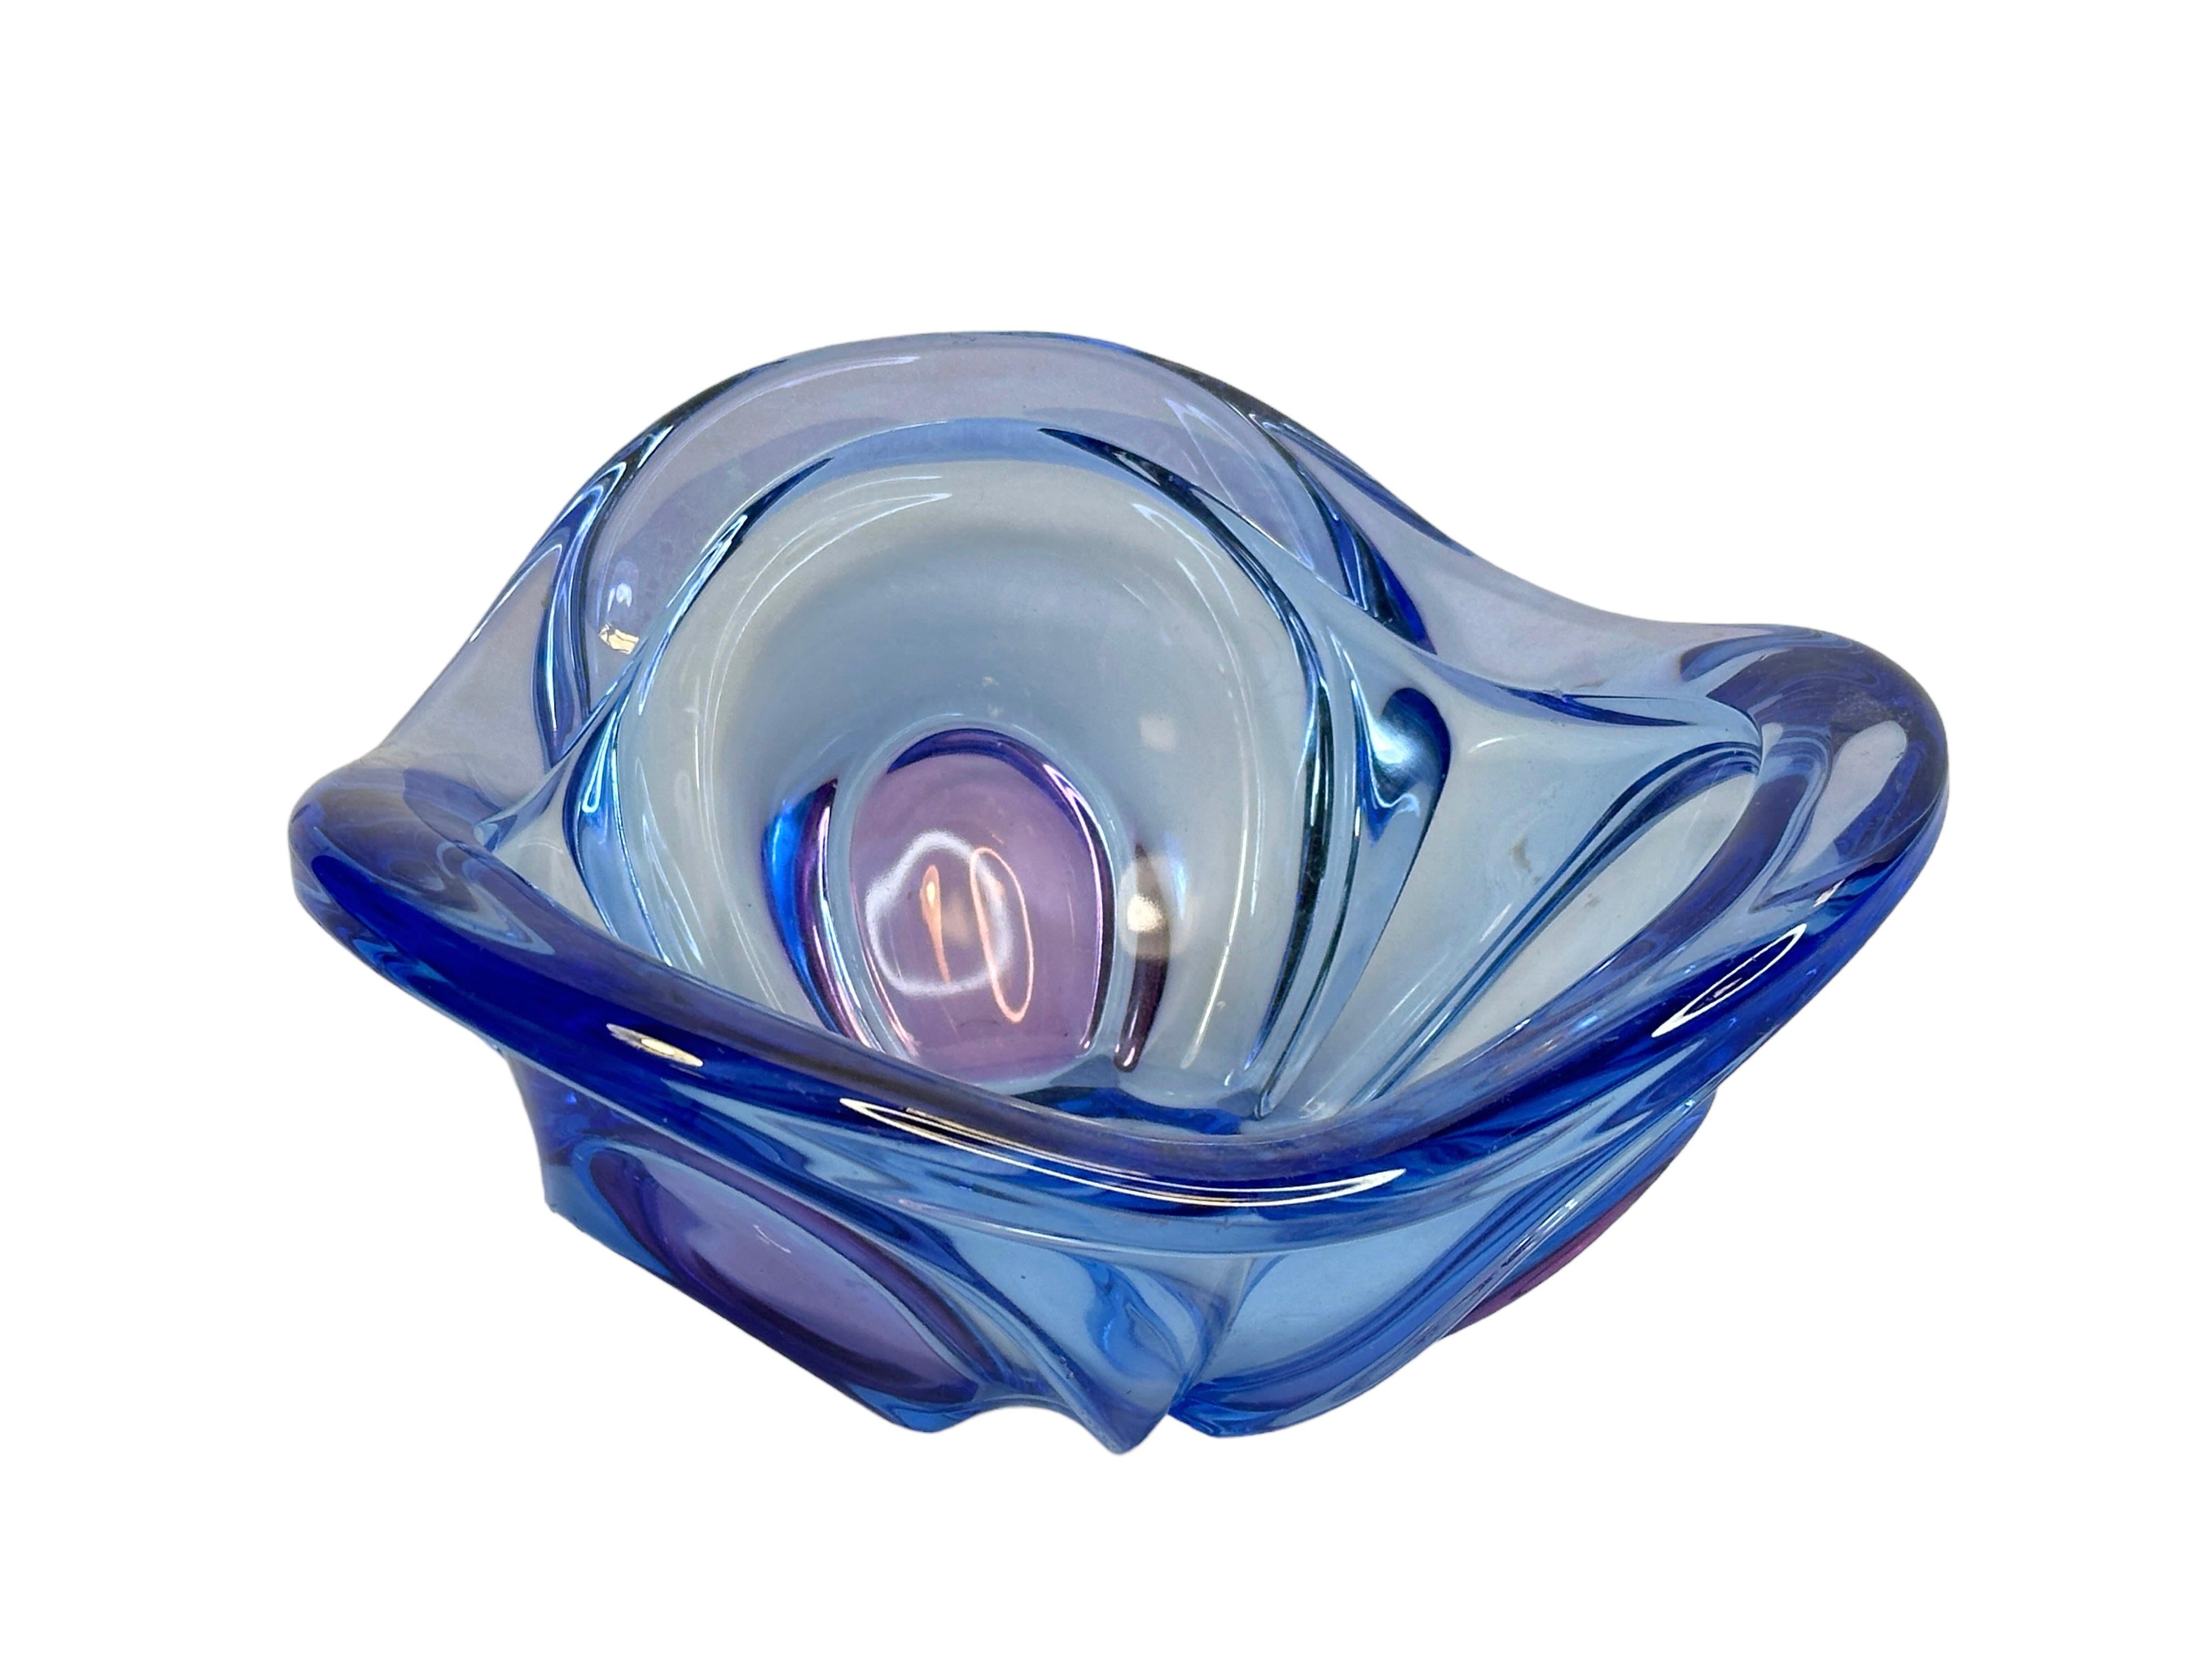 Gorgeous hand blown Murano art glass piece with Sommerso and bullicante techniques. A beautiful organic shaped bowl, catchall or centrepiece, Venice, Murano, Italy, 1970s. Colors are purple and blue. A nice addition to any room. Found at an Estate